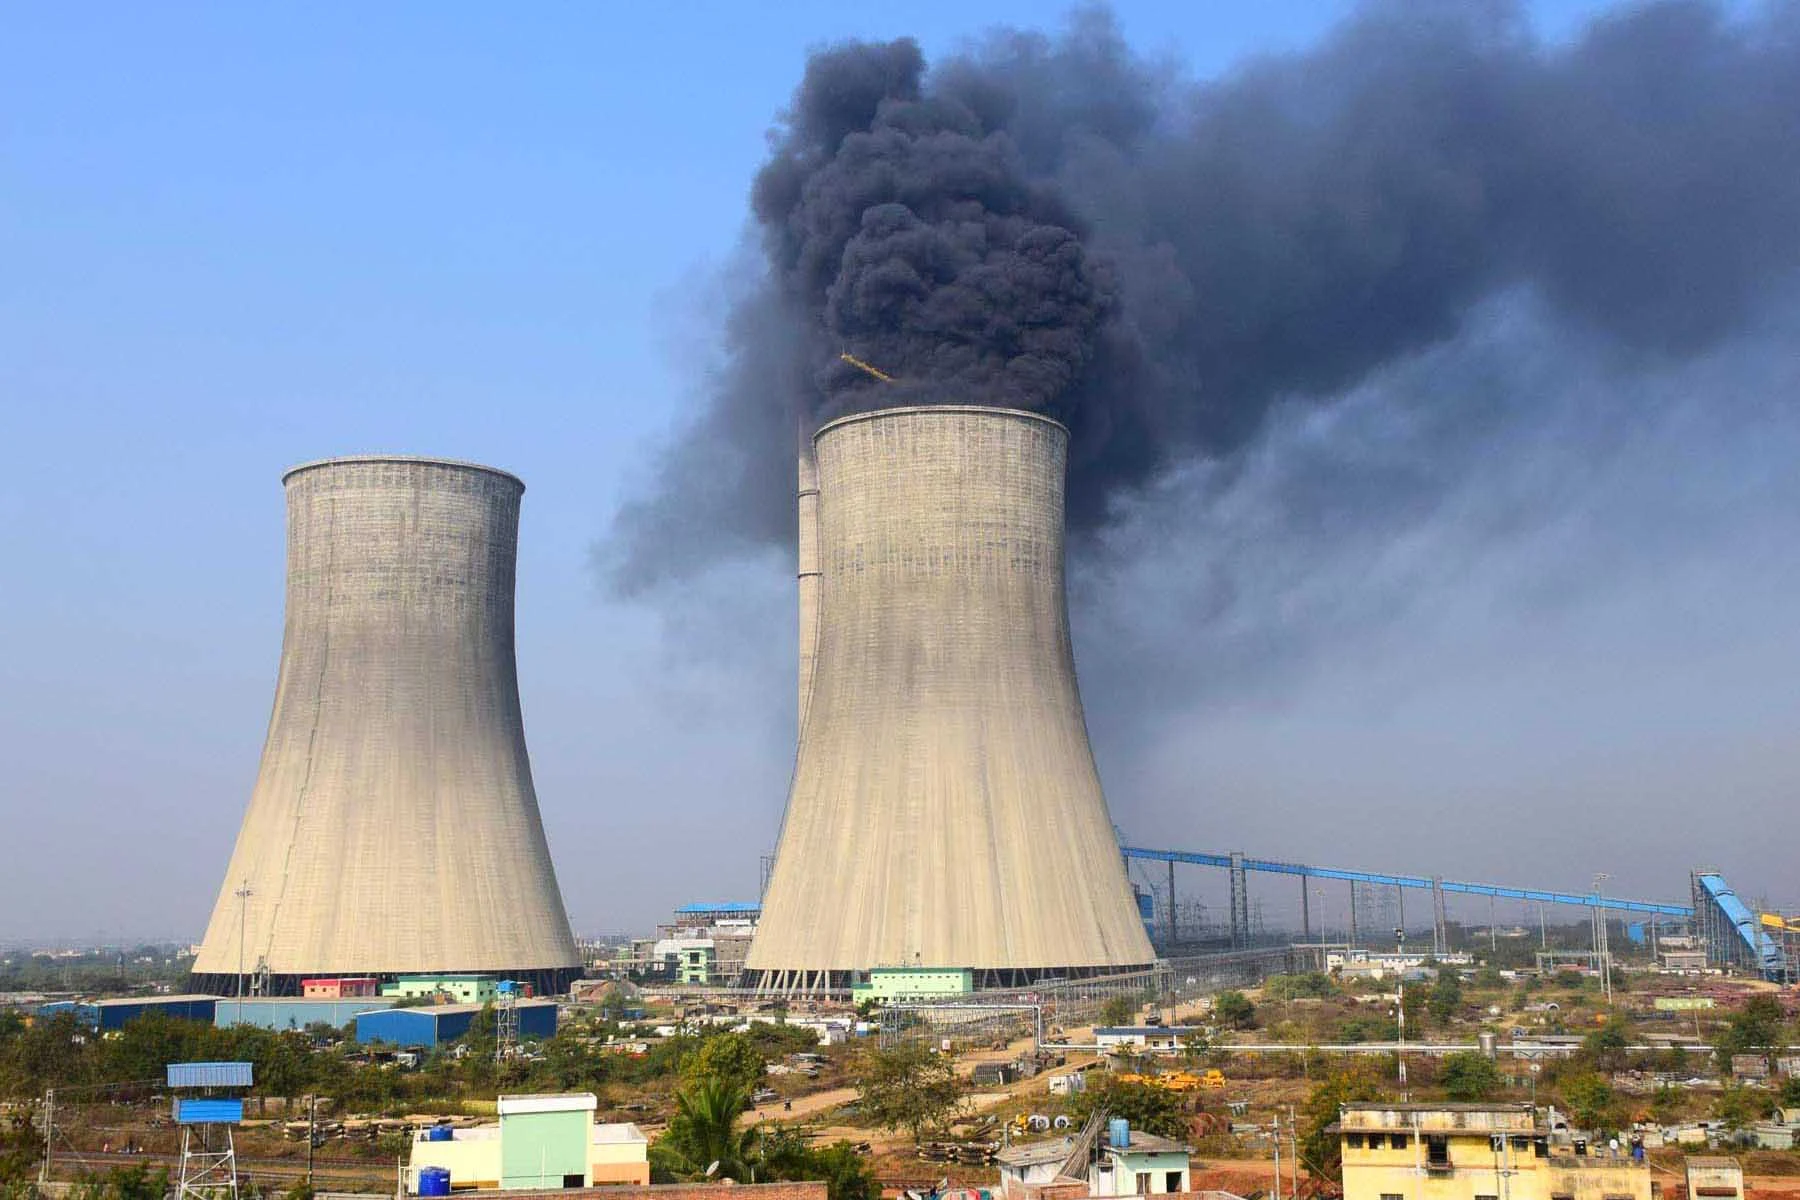 WBBSE Notes For Class 8 Chapter 7 Human Activities And Environmental Degradation Influence Of Thermal Power Plant On Environment